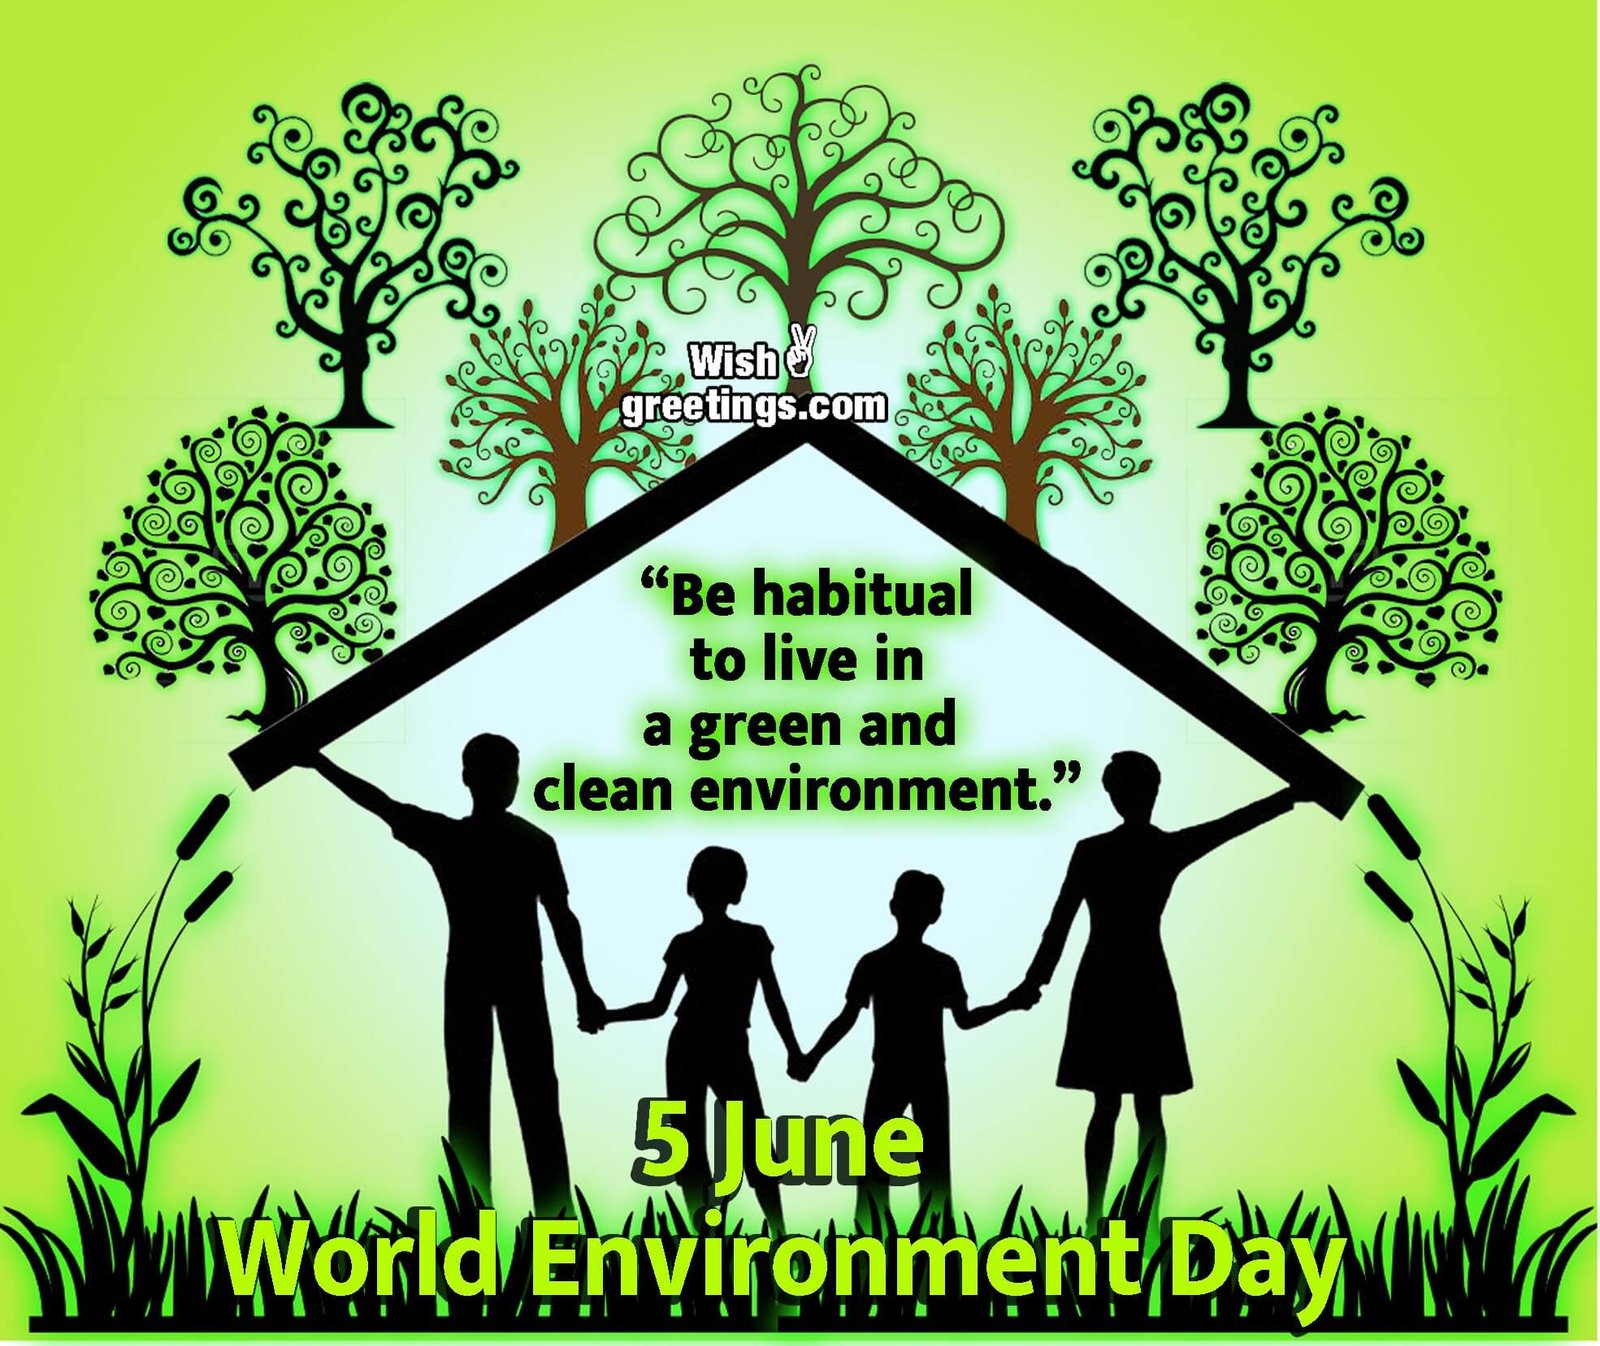 5 June World Environment Day Quote Image